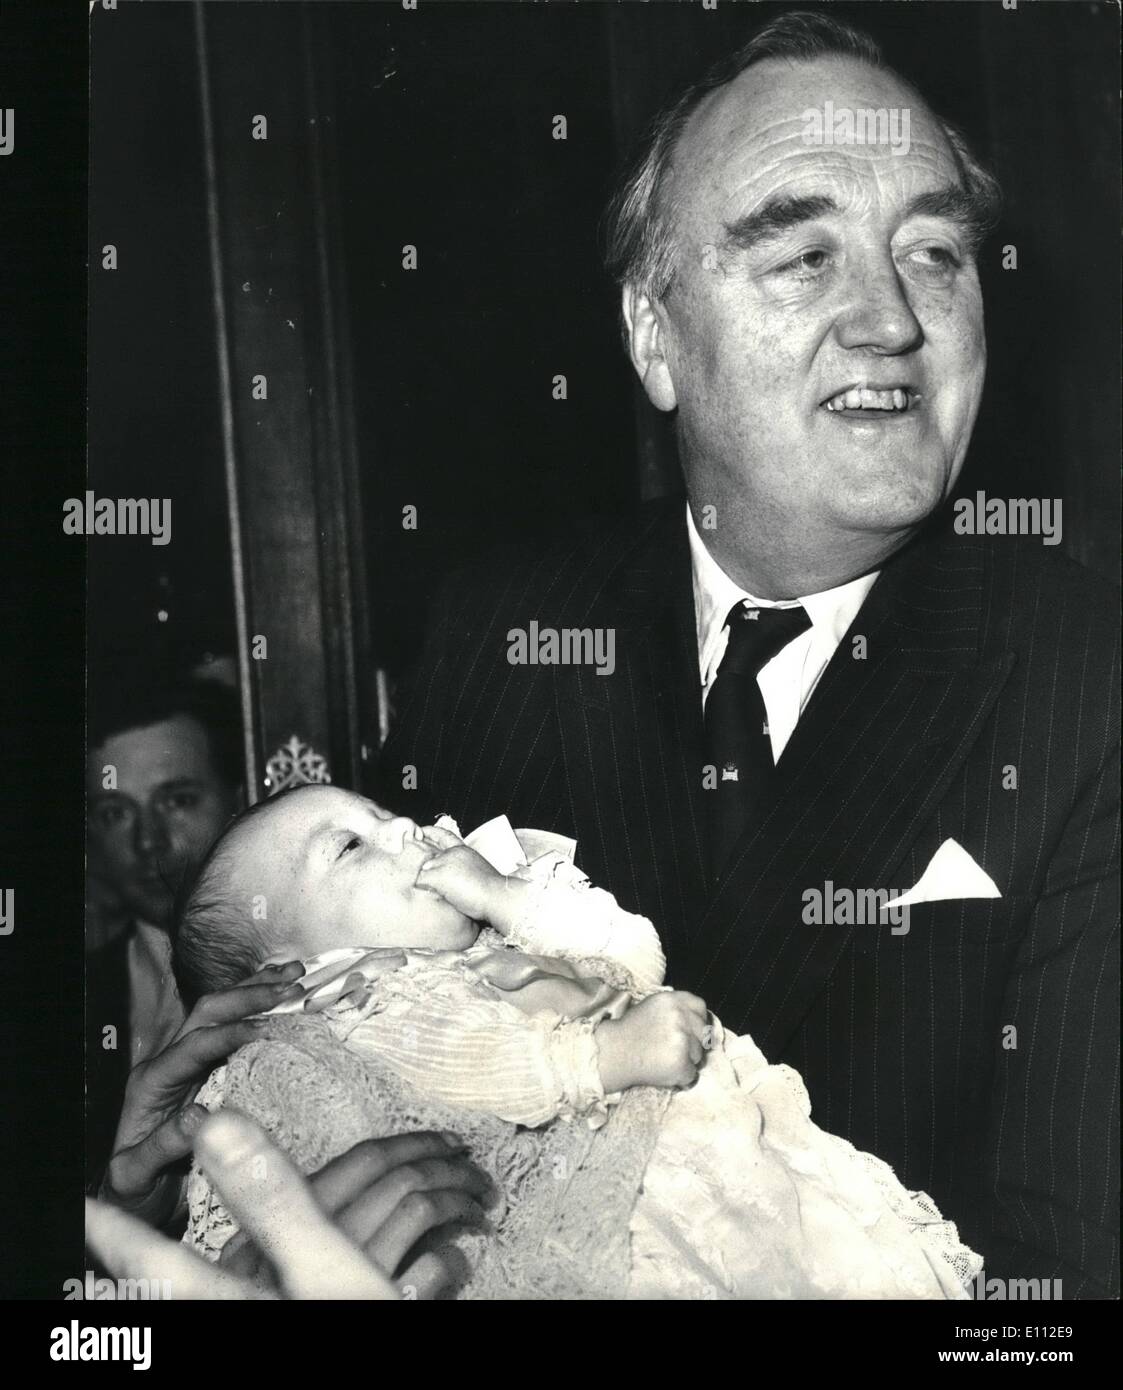 Feb. 02, 1975 - Willie Whitmen Holds The Baby: Mr. William Whitelaw today attended the Christening of is grand daughter, Miranda, the 5-month-old daughter of Mr. Whitelaw's daughter Carol and her husband Robert Thomas. The Christening took place at the Crypt Chapel in the House of Commons. Photo Shows Willie Holds the Baby Mr.Whitelaw is pictured with his baby granddaughter, Miranda, in his arms after the Christening today. Stock Photo